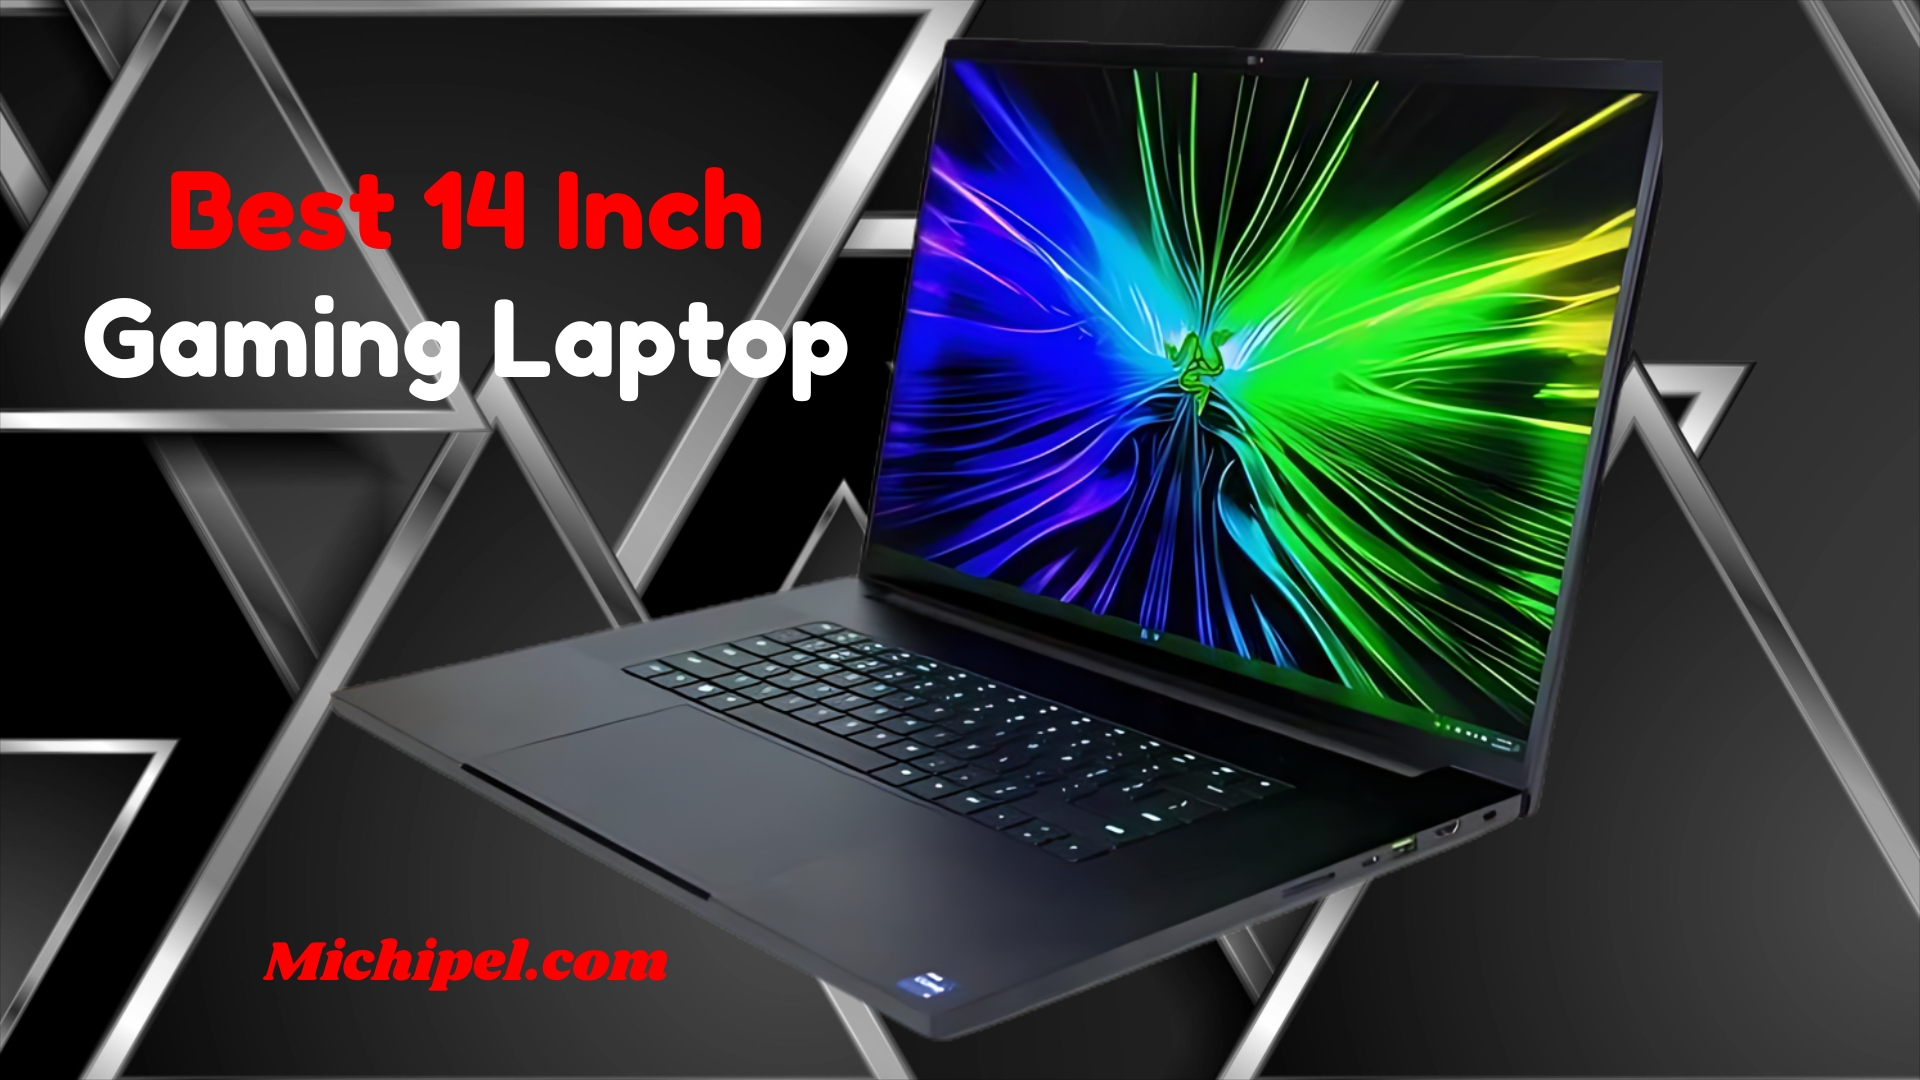 Find the top 3 14-inch gaming laptops: Buying Guide